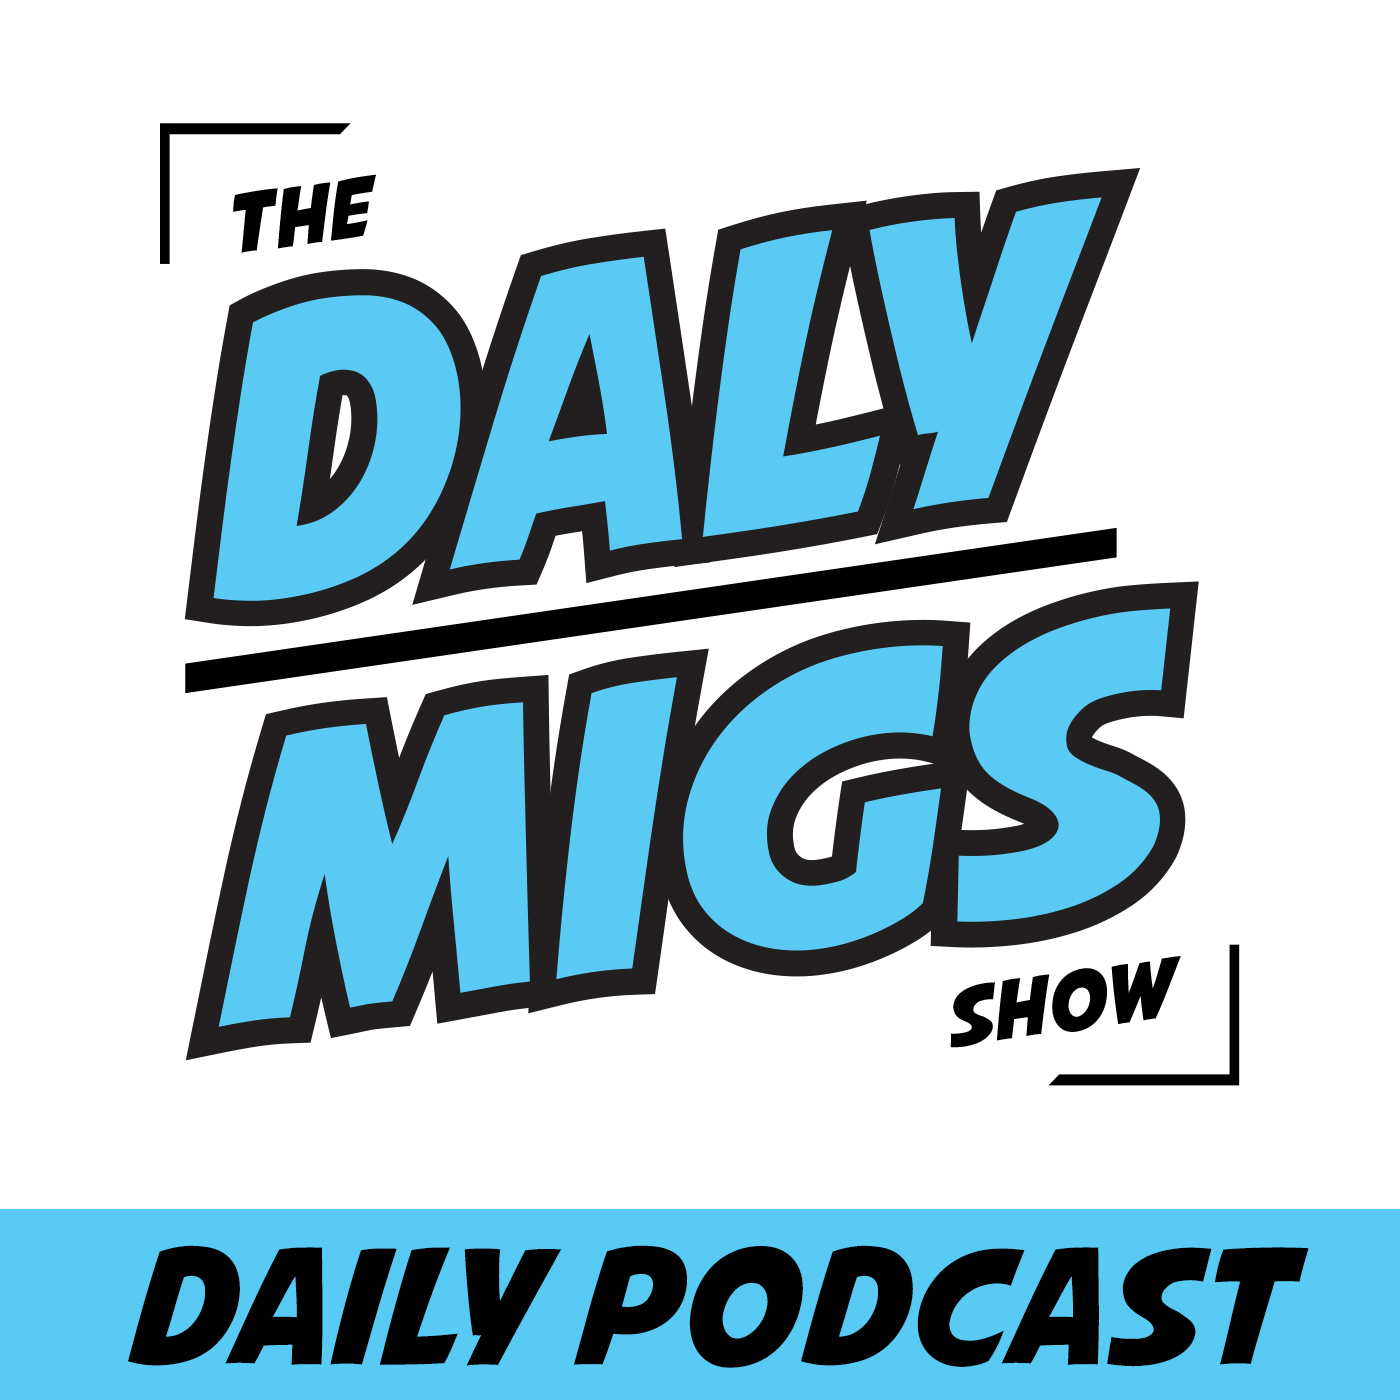 Daily Podcast pt. 2 - "Sara's man and his eating contest!"